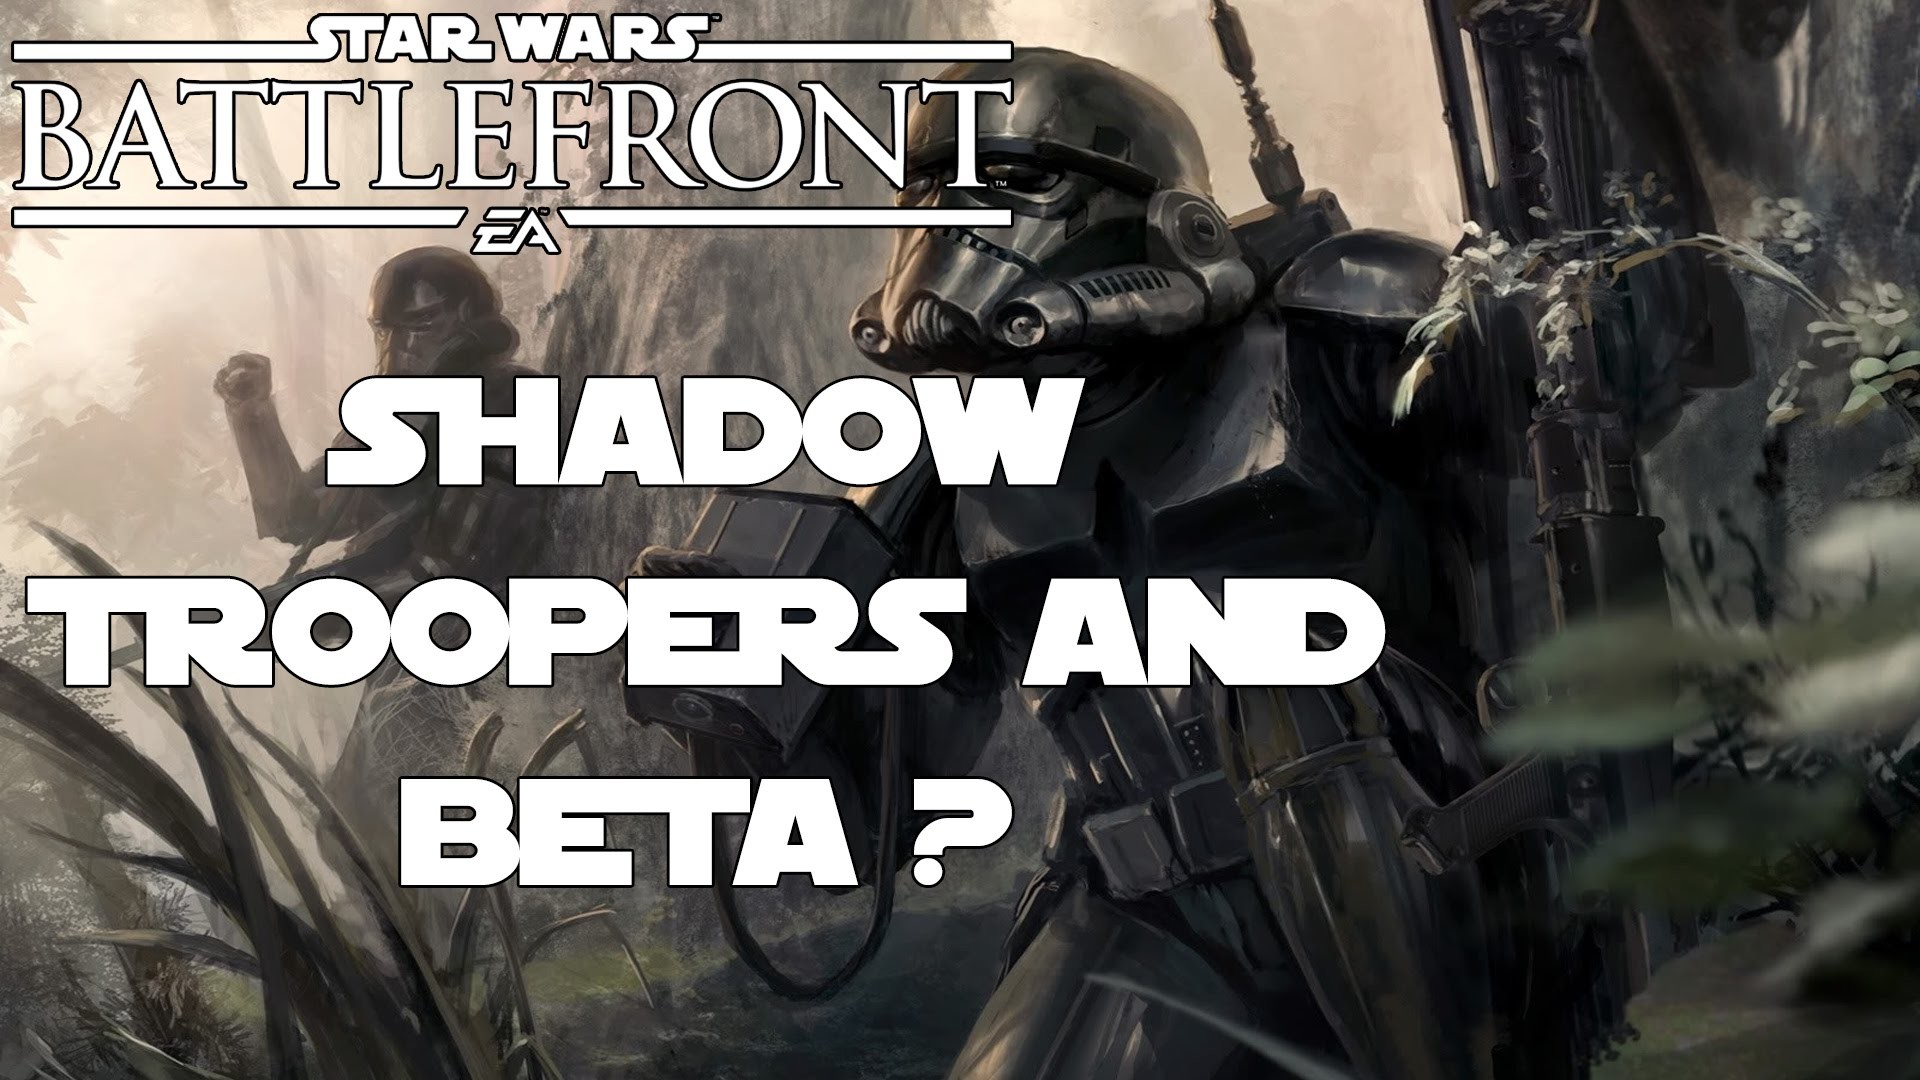 Star Wars Battlefront – Shadow Troopers and a Beta ??